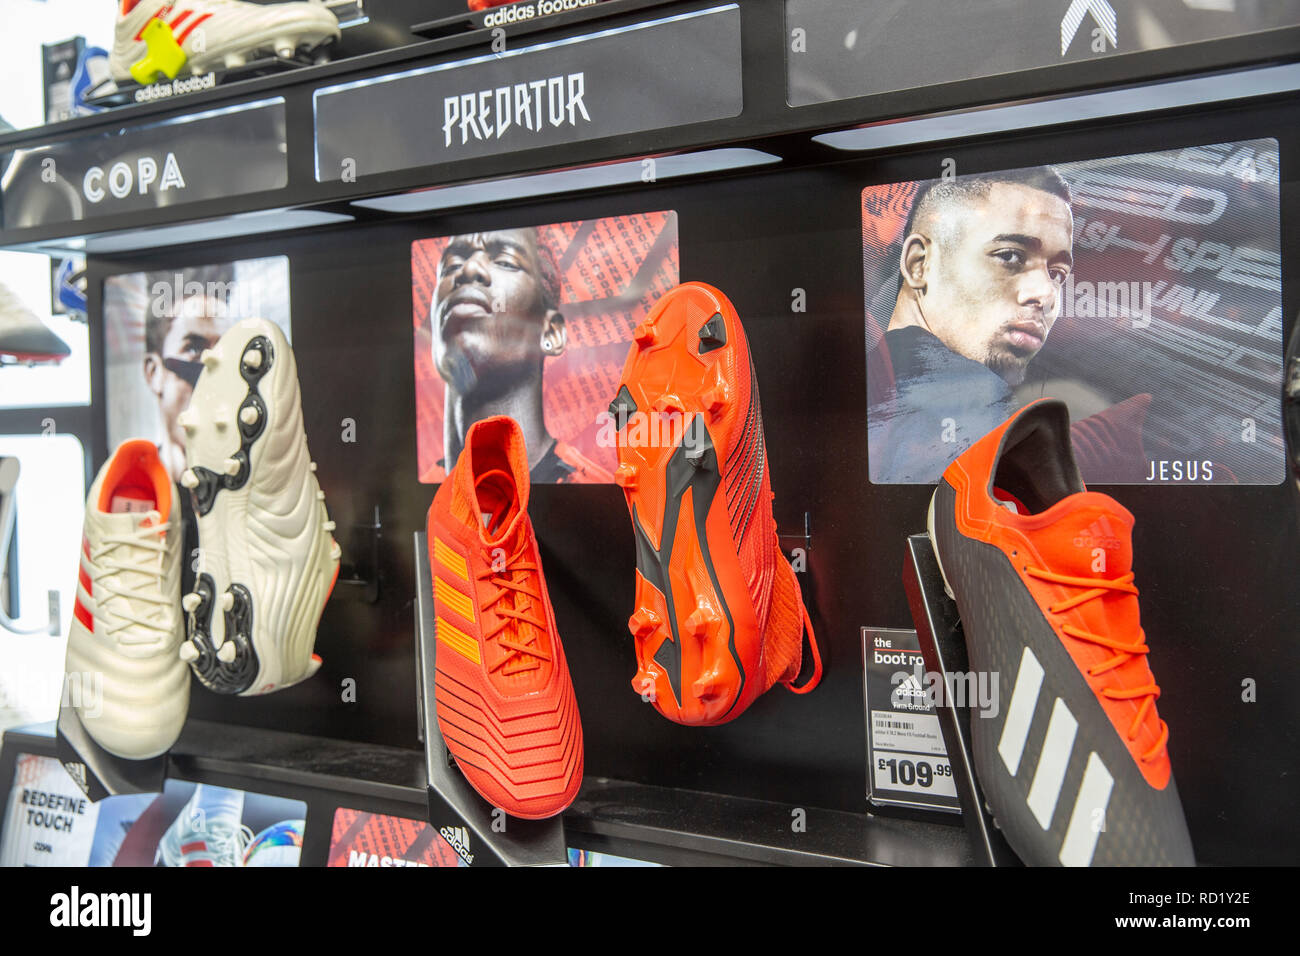 Adidas predator football soccer boots on sale in a UK sports shop,England Stock Photo